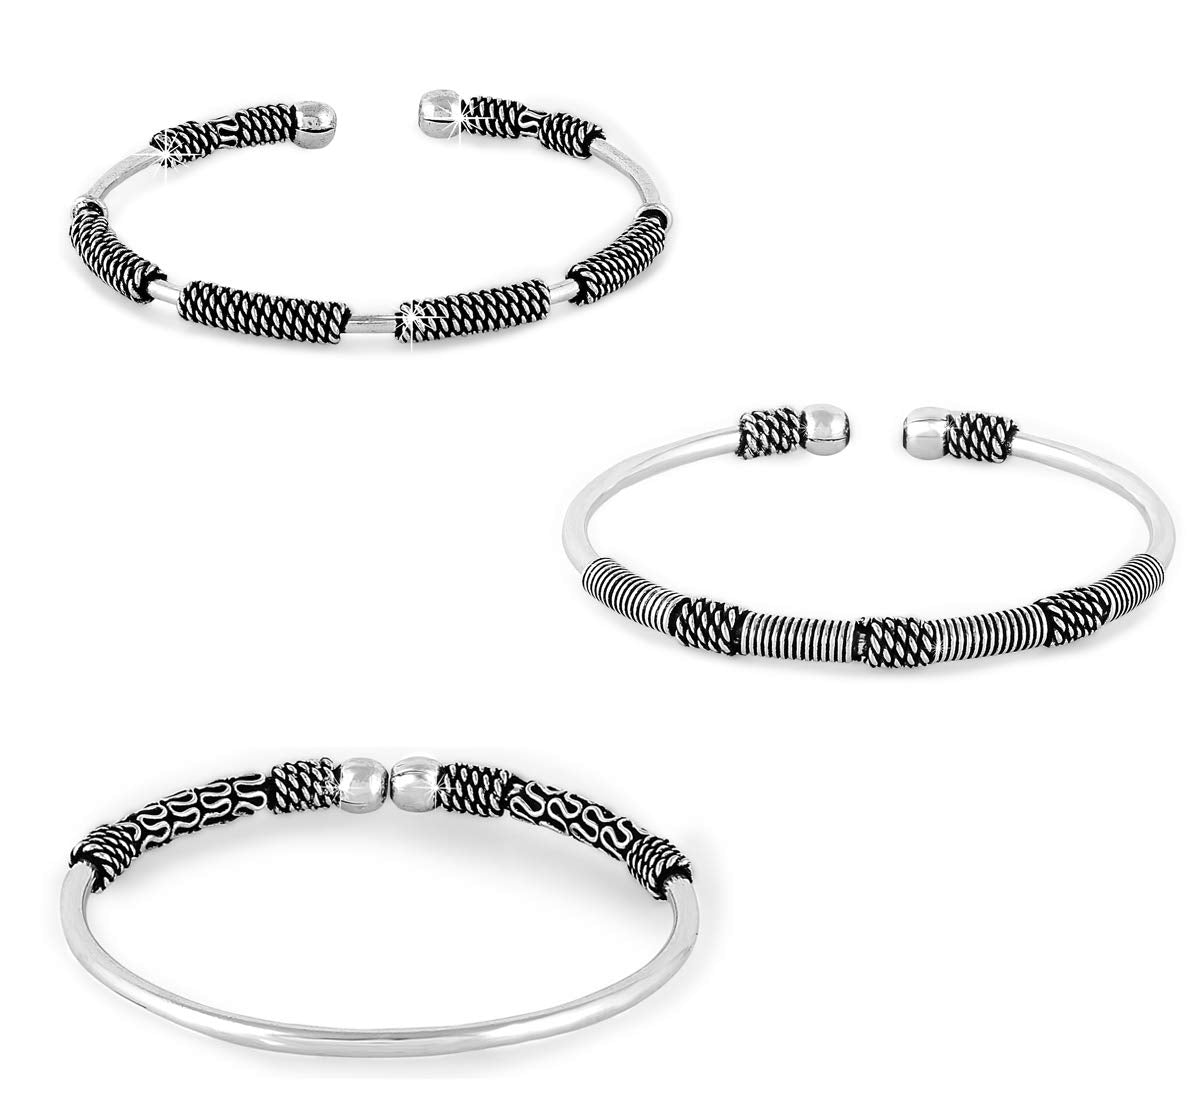 Yellow Chimes Oxidised Bangles for Women Silver Oxidised Bangles Combo of 3 Pcs Vintage Tribal Look Open Kadaa Bangle Bracelet for Women and Girls